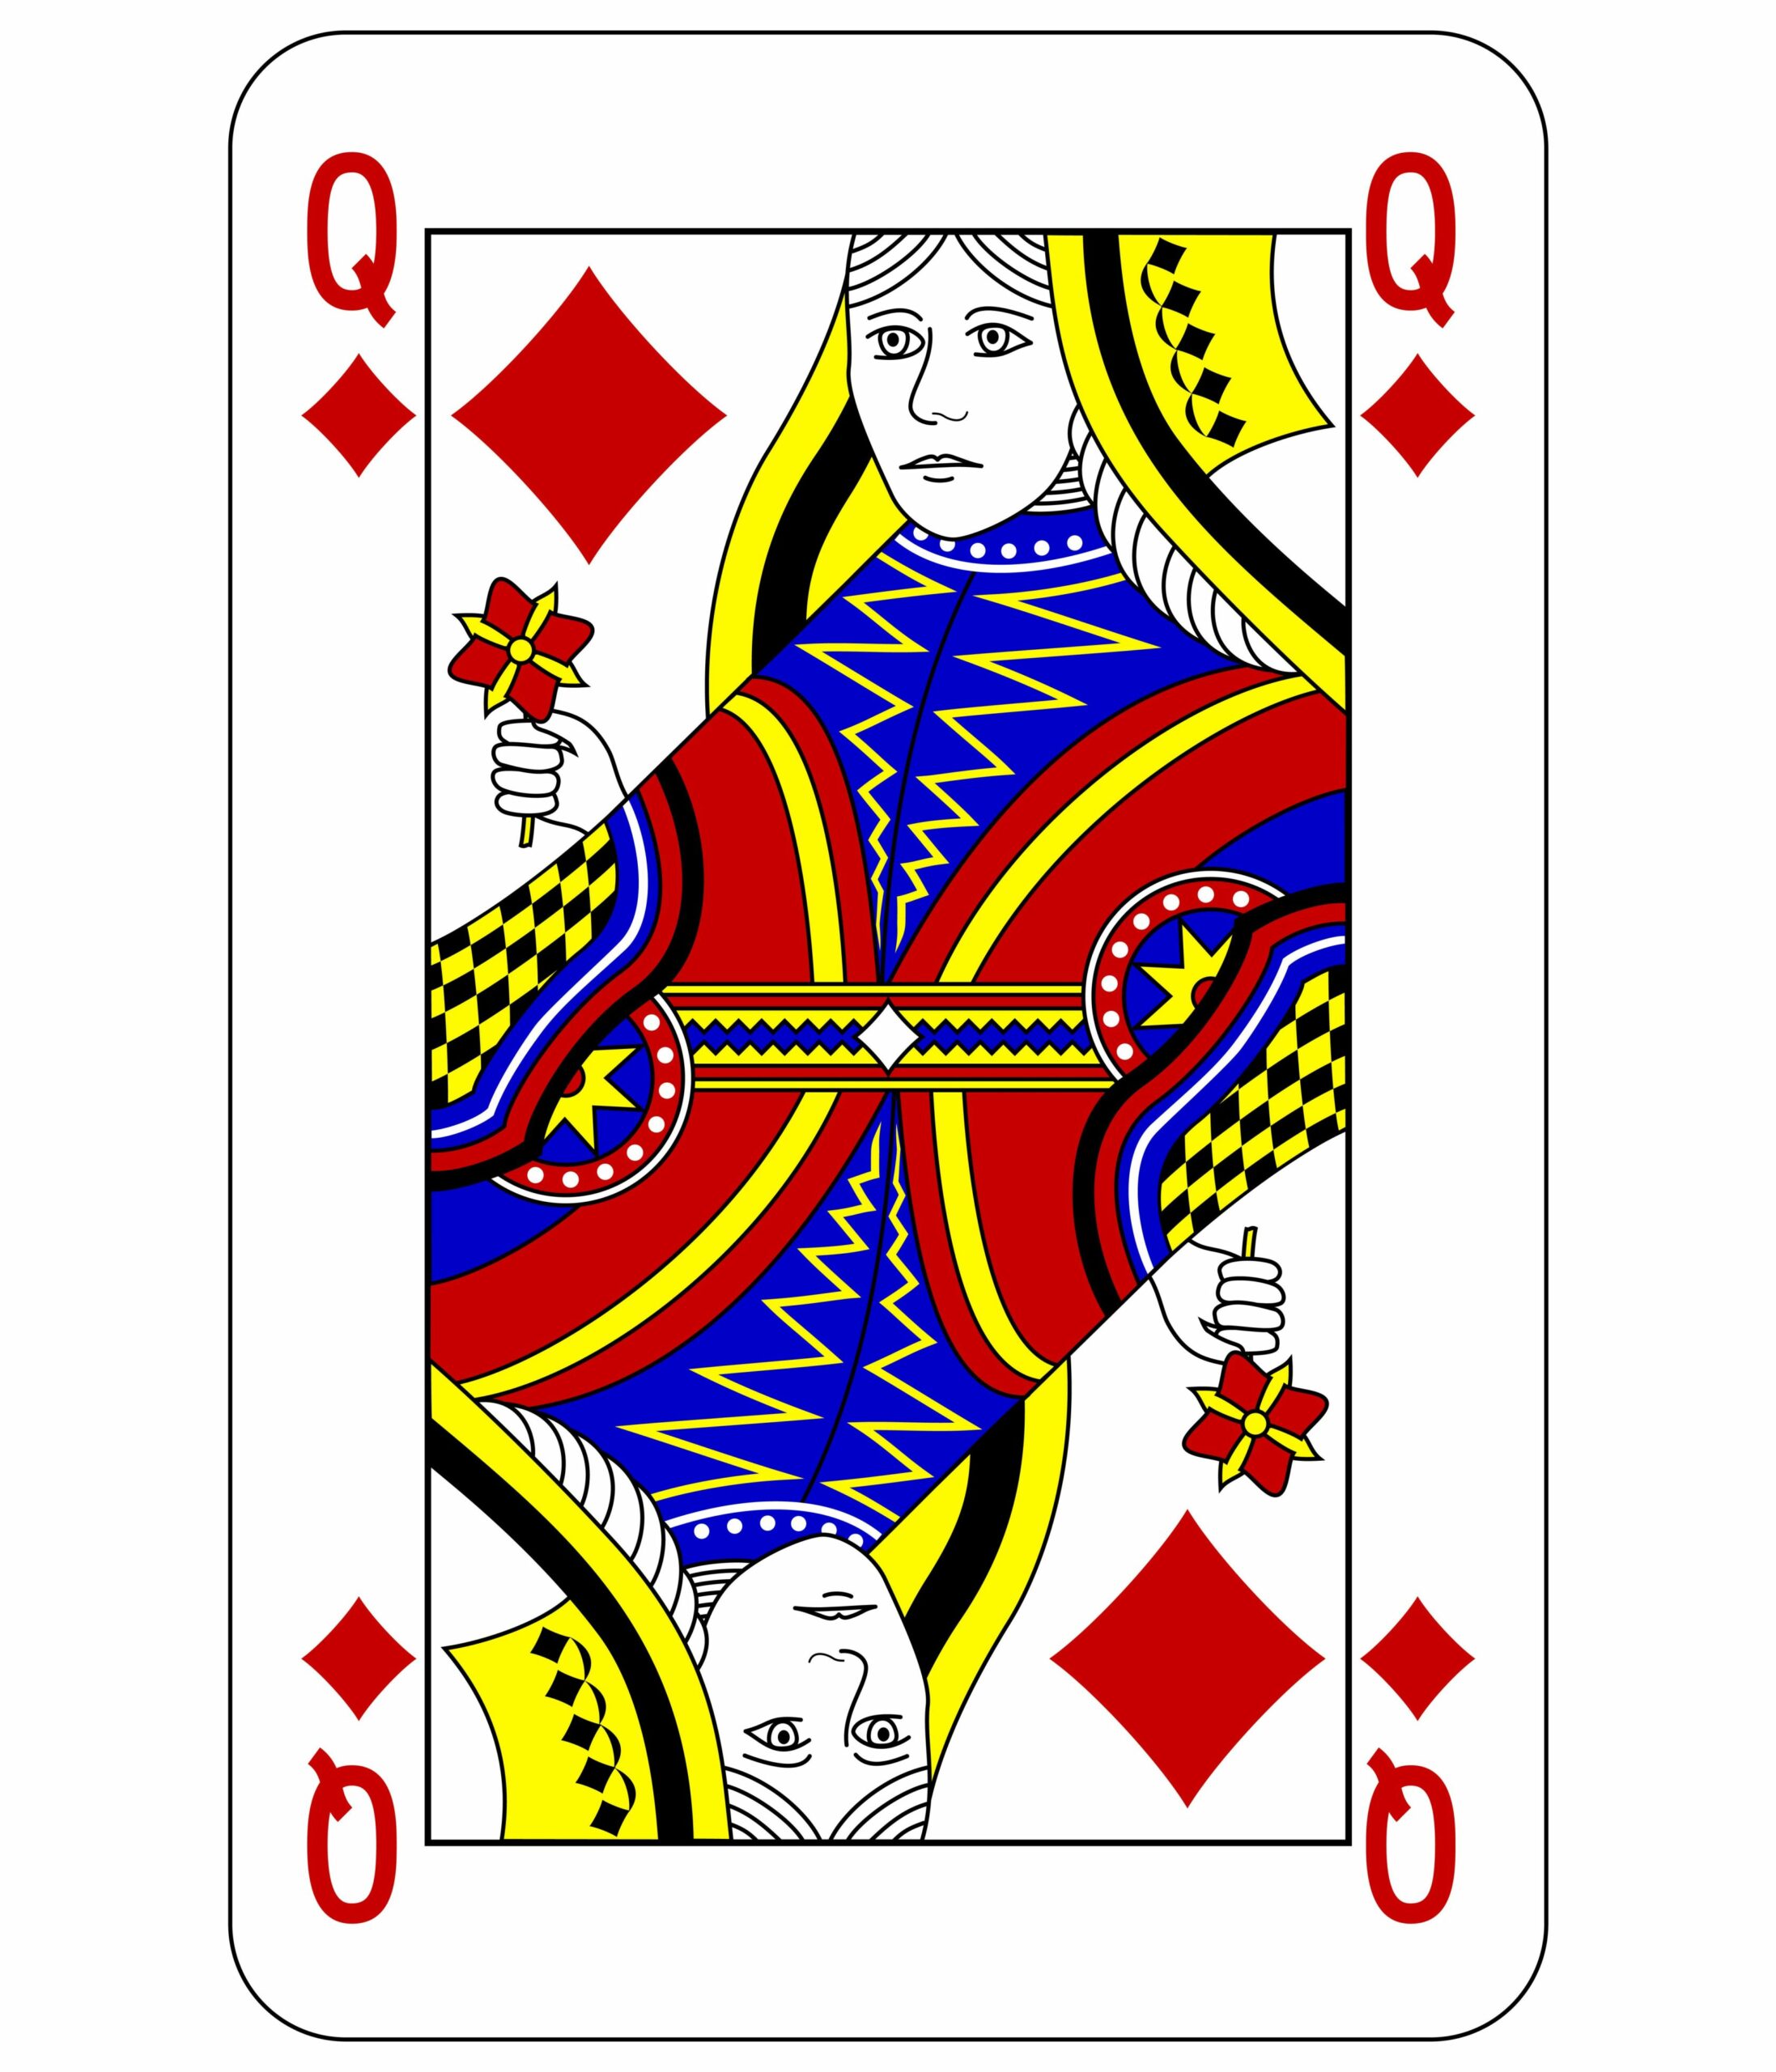 What is the meaning of the King of Diamonds, How to use it